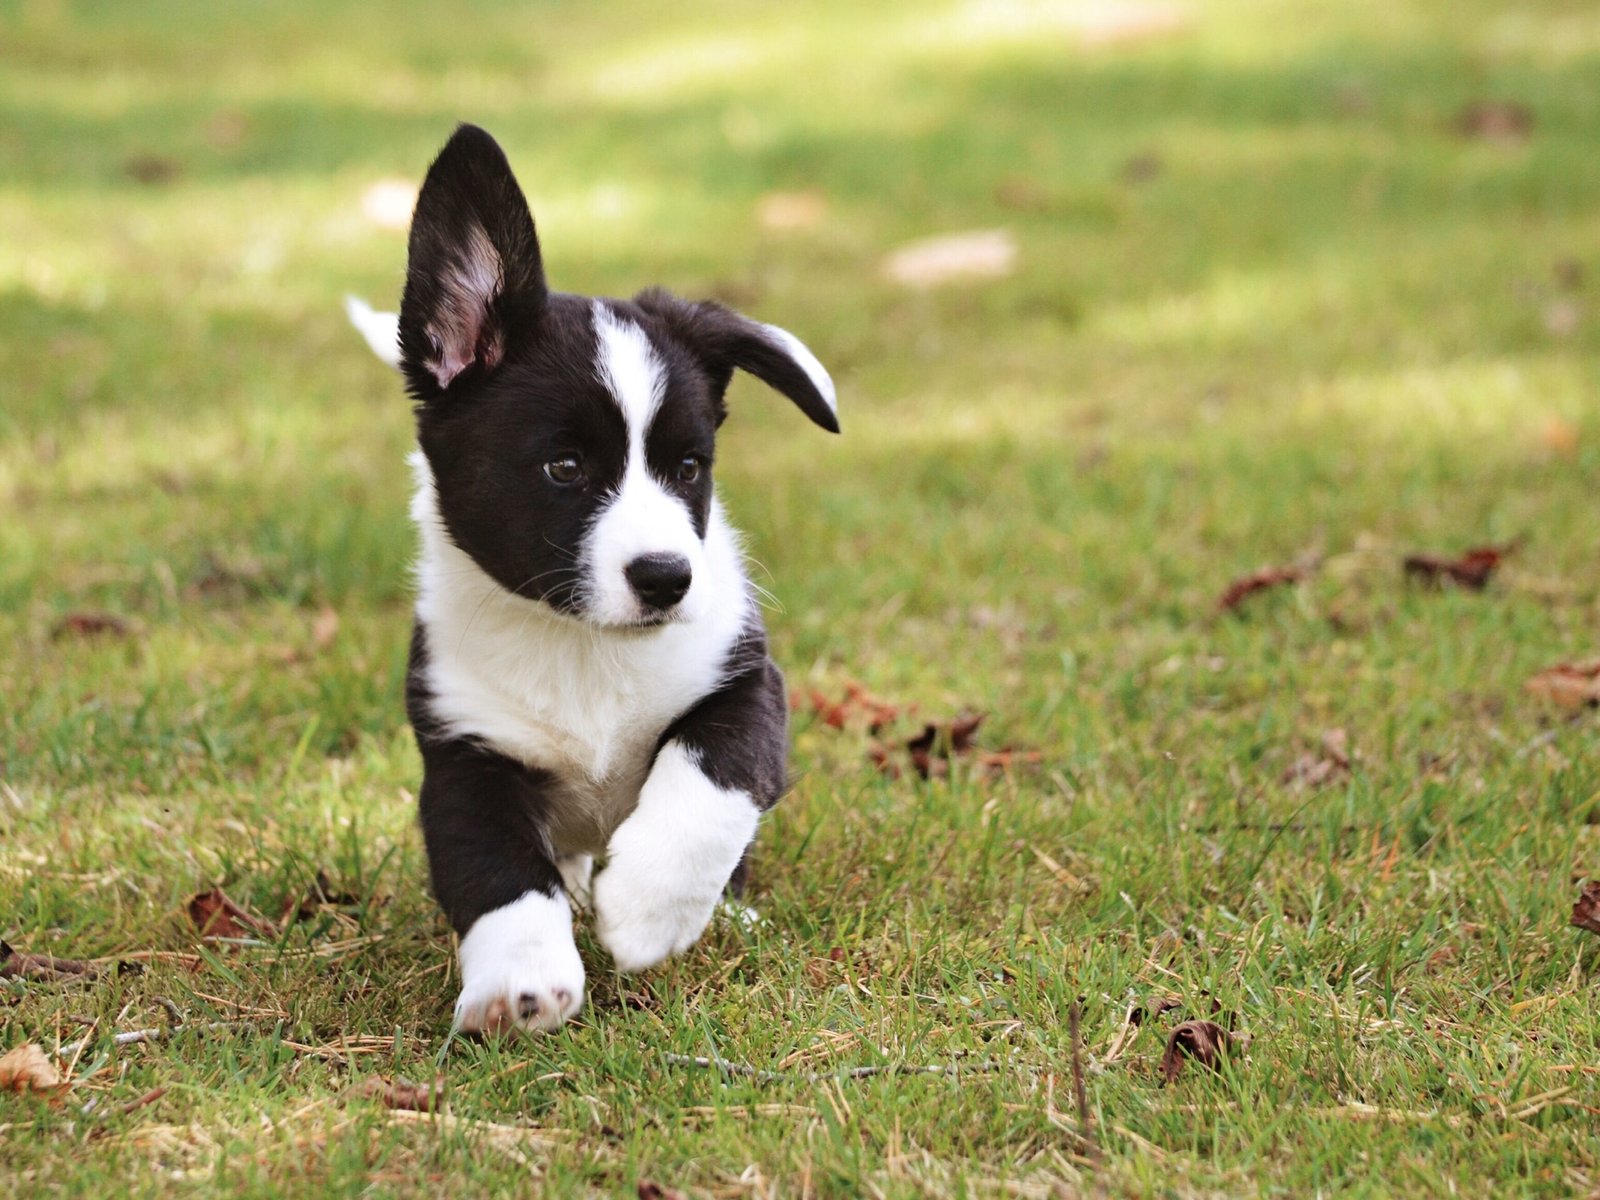 Rookies Puppy class - 11 weeks - 5.5 Months Saturday 3:30pm Burleigh 4th Feb 2023